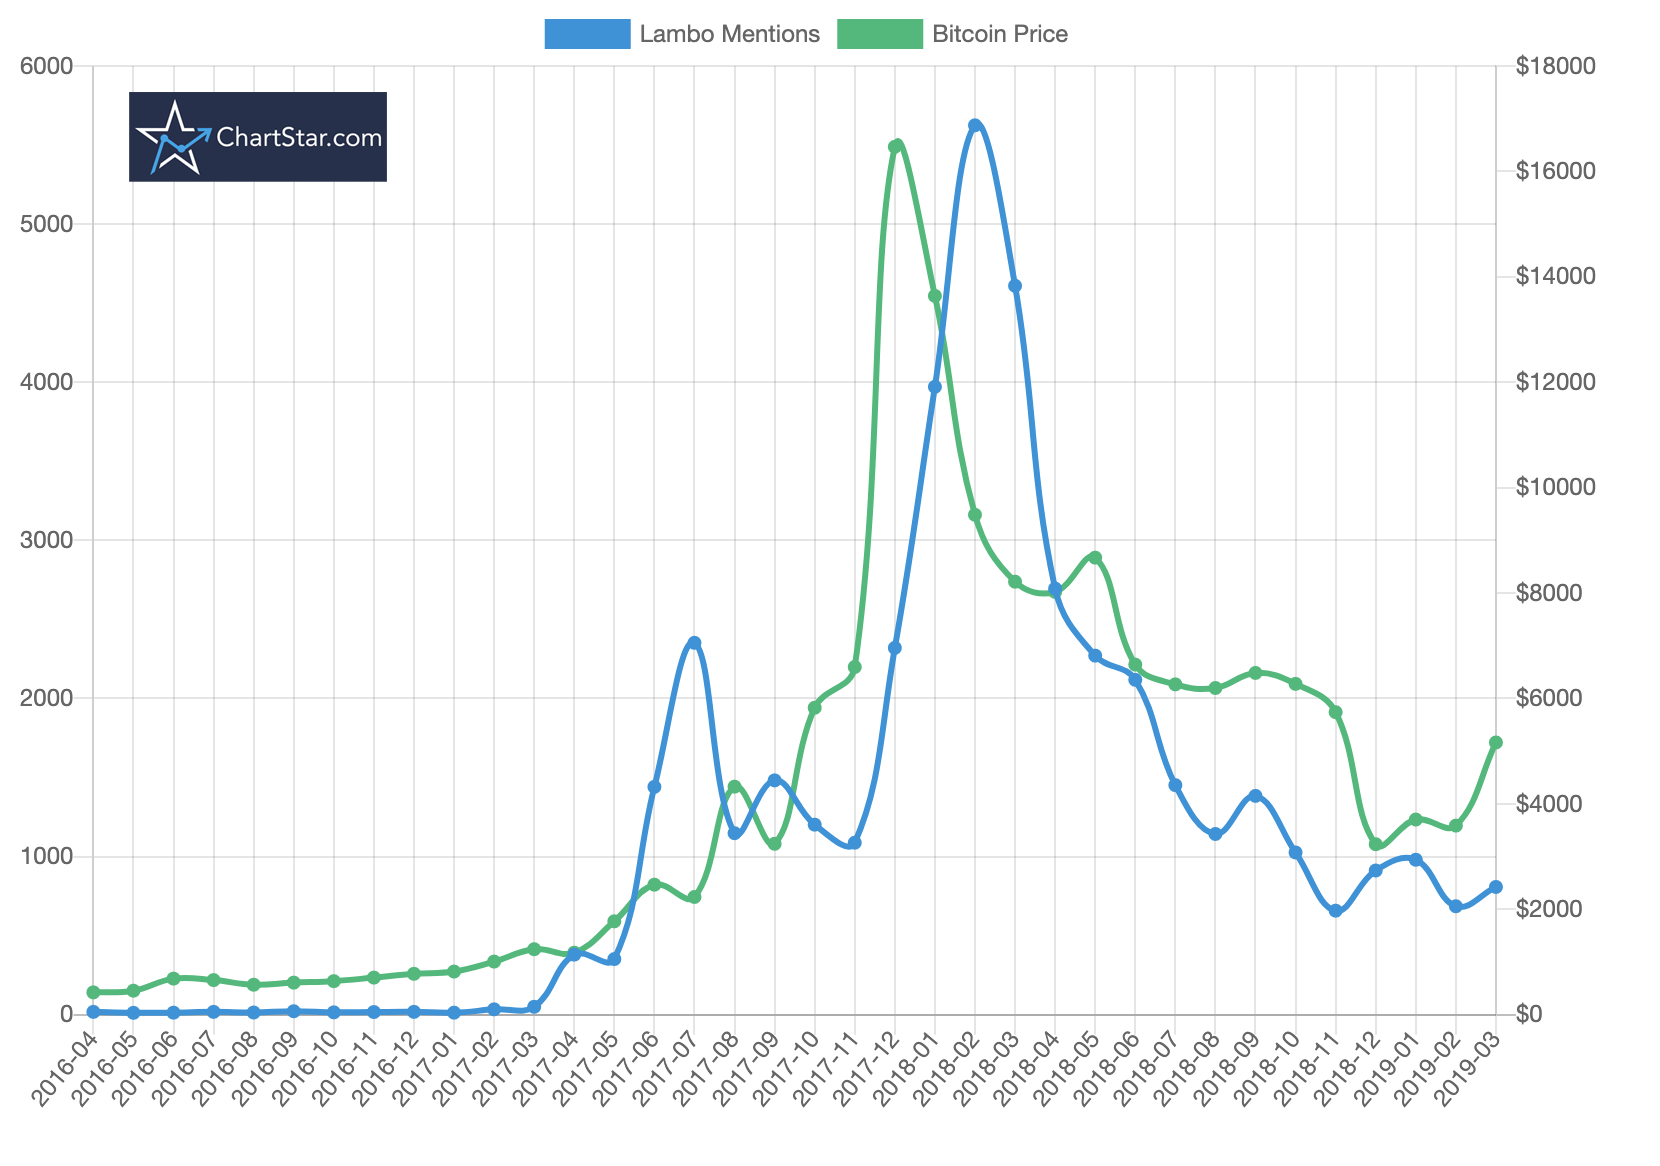 Mentions of Lamborghinis On Reddit As A Predictor of Bitcoin Price